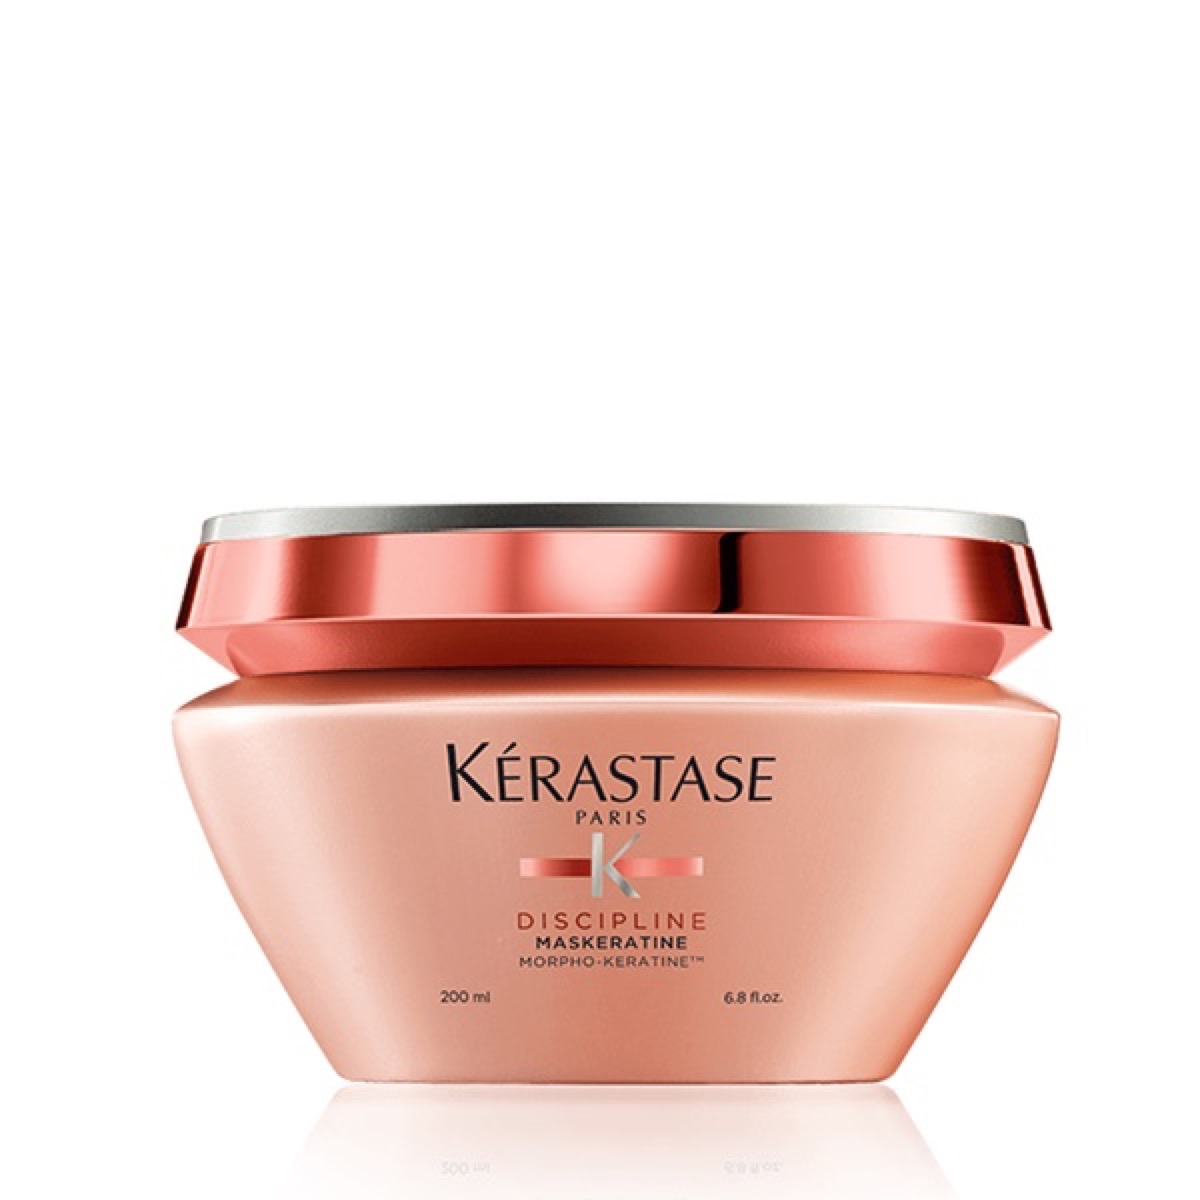 Kerastase Product {Save Money on Beauty Products}